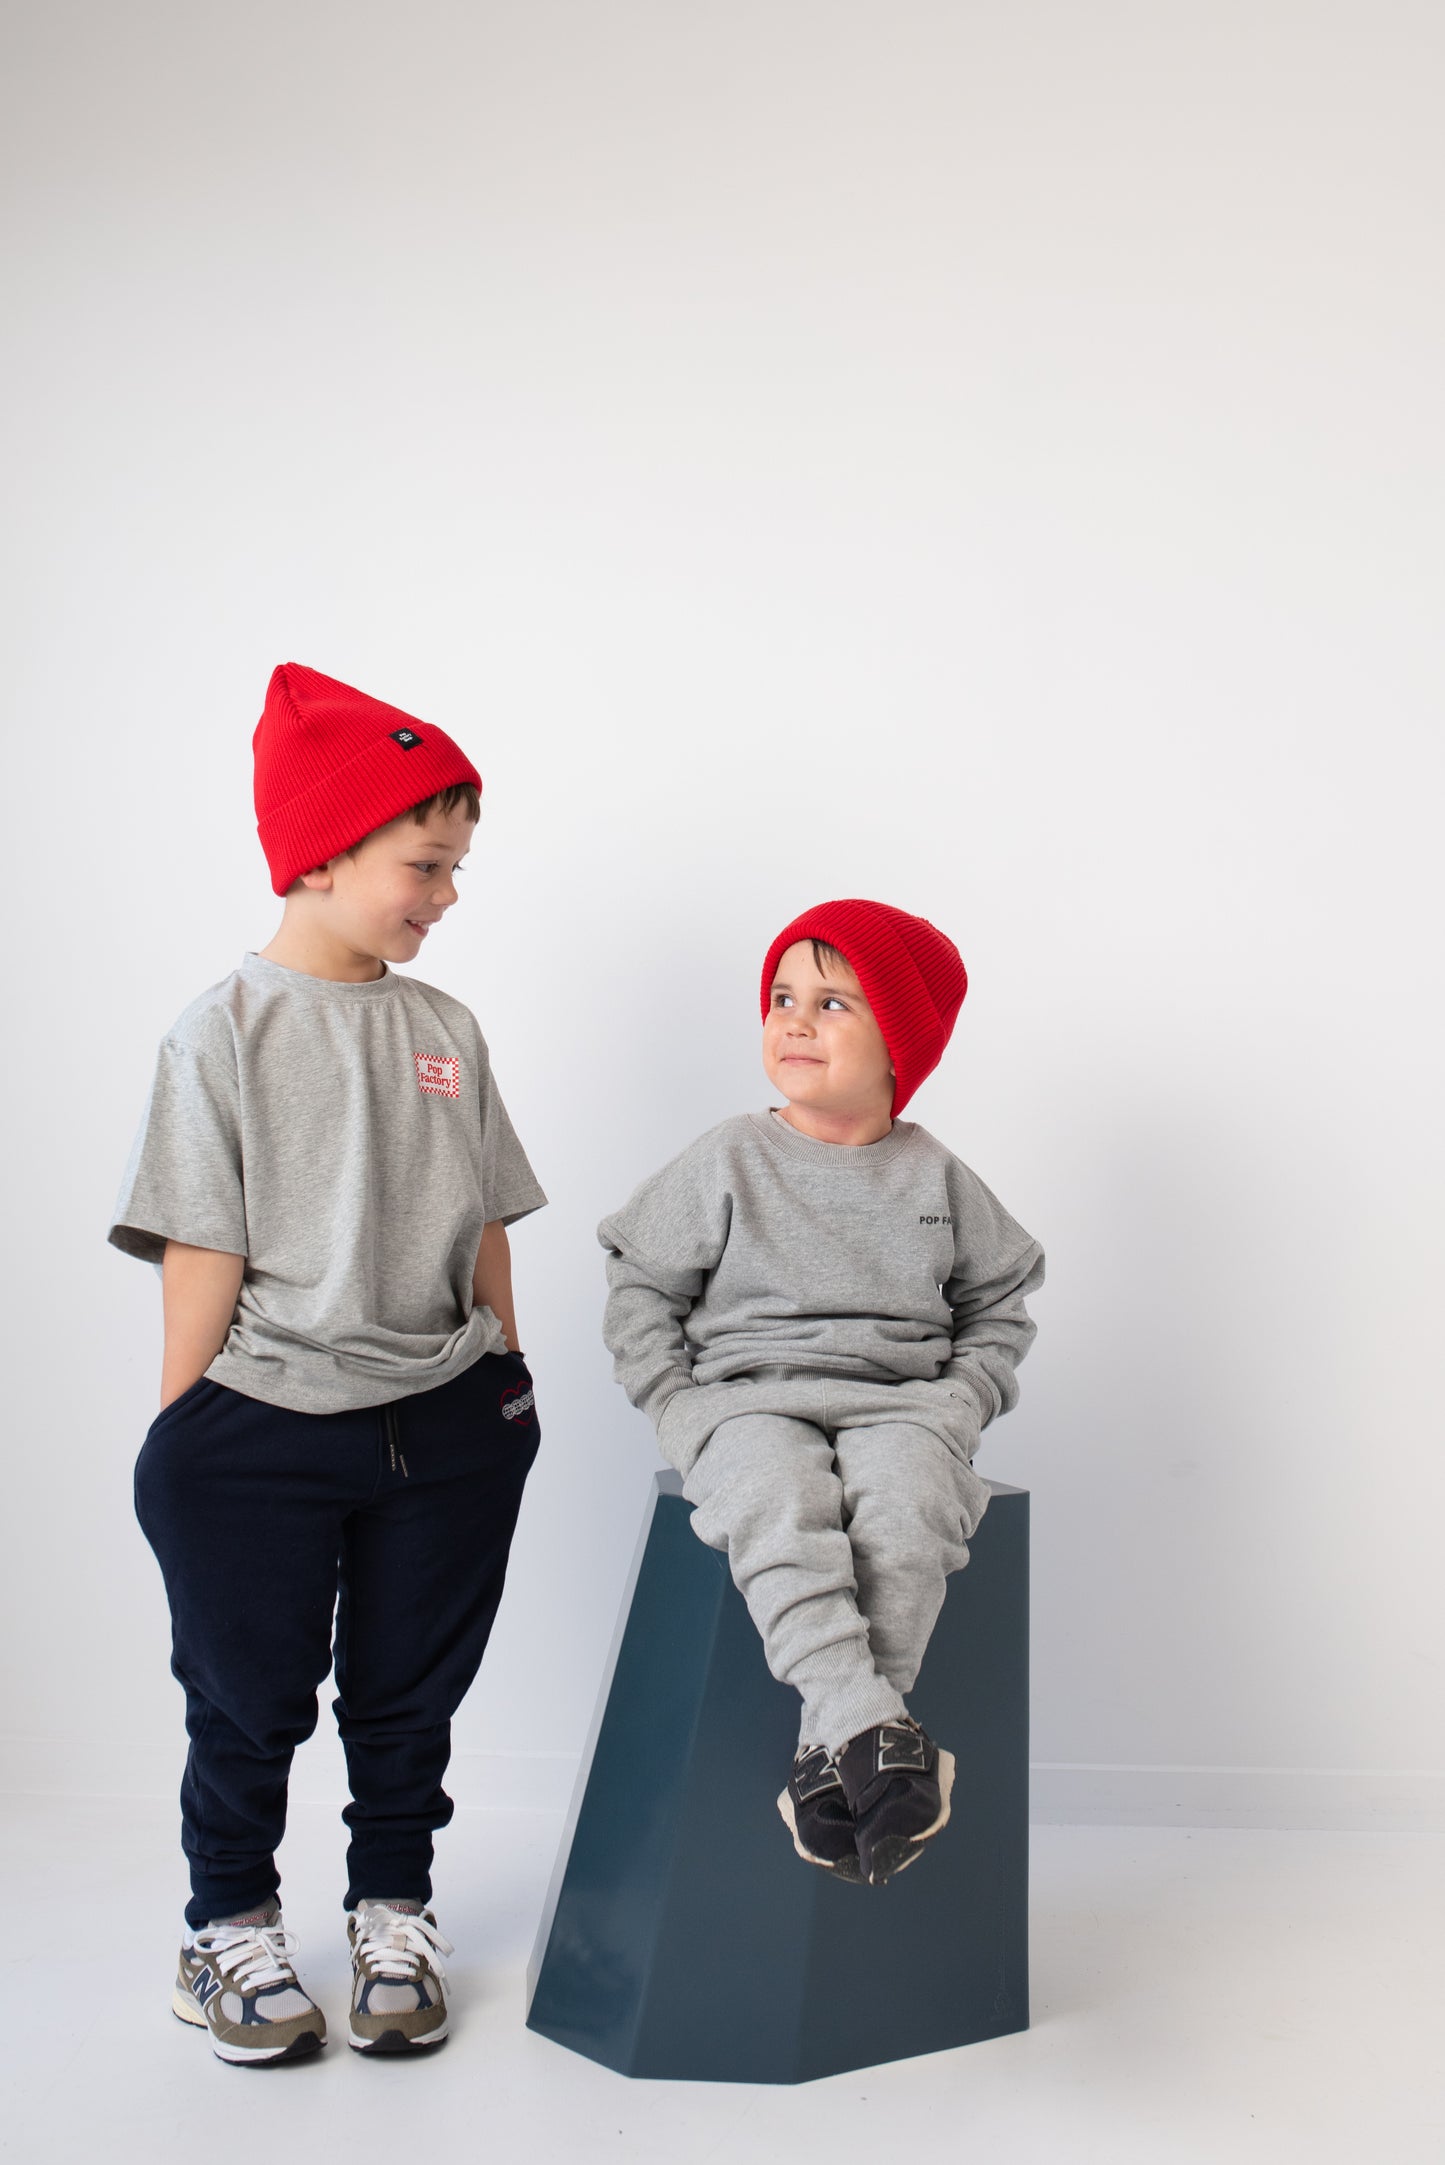 POP FACTORY SHOP // Daily Beanie RED